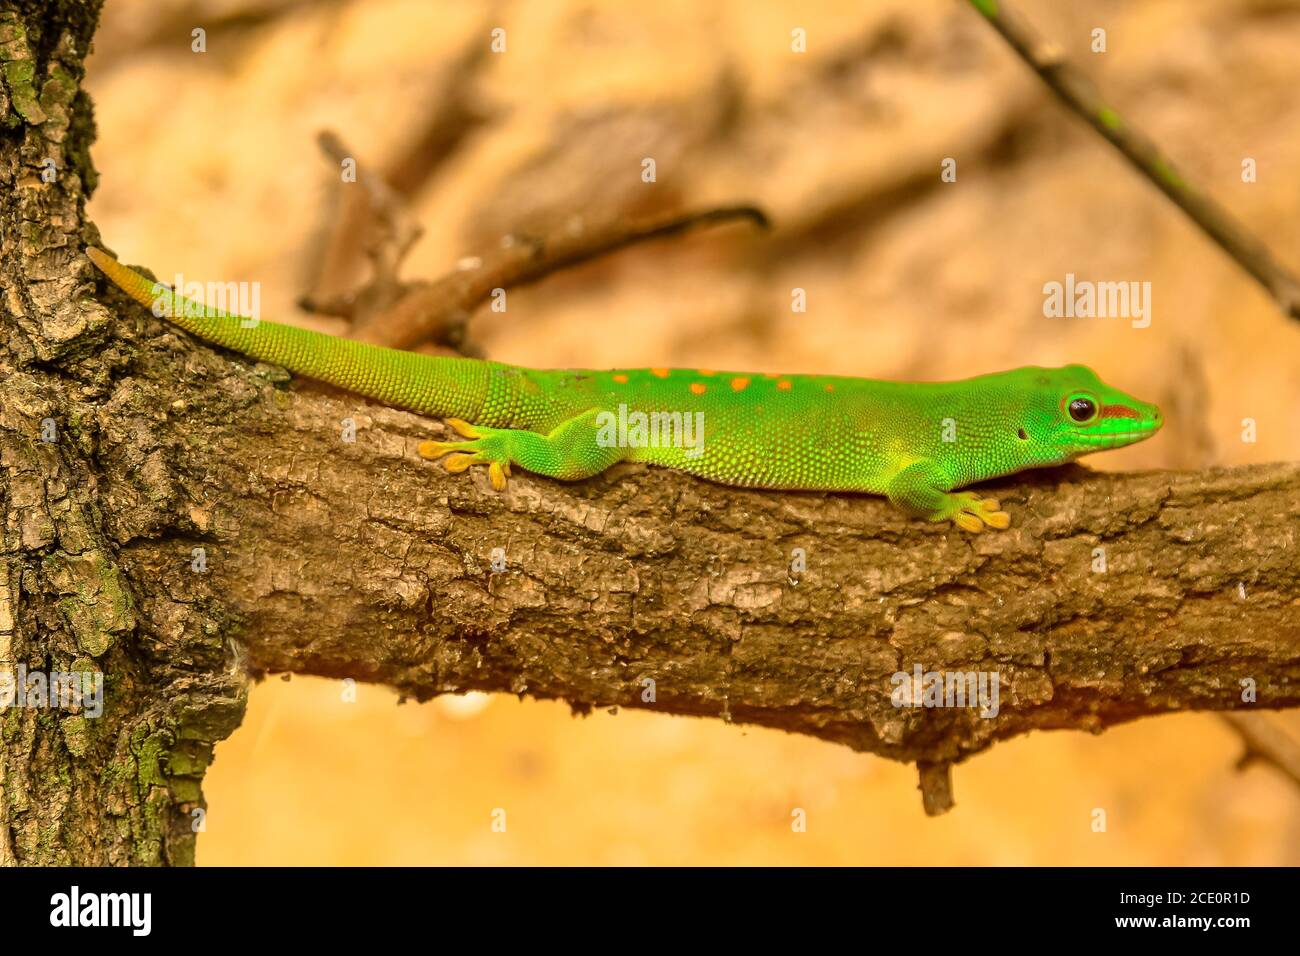 Close up of a green Gecko, Phelsuma madagascariensis species, also called Madagascar day gecko. It lives in Madagascar rainforests. Resting on a tree Stock Photo